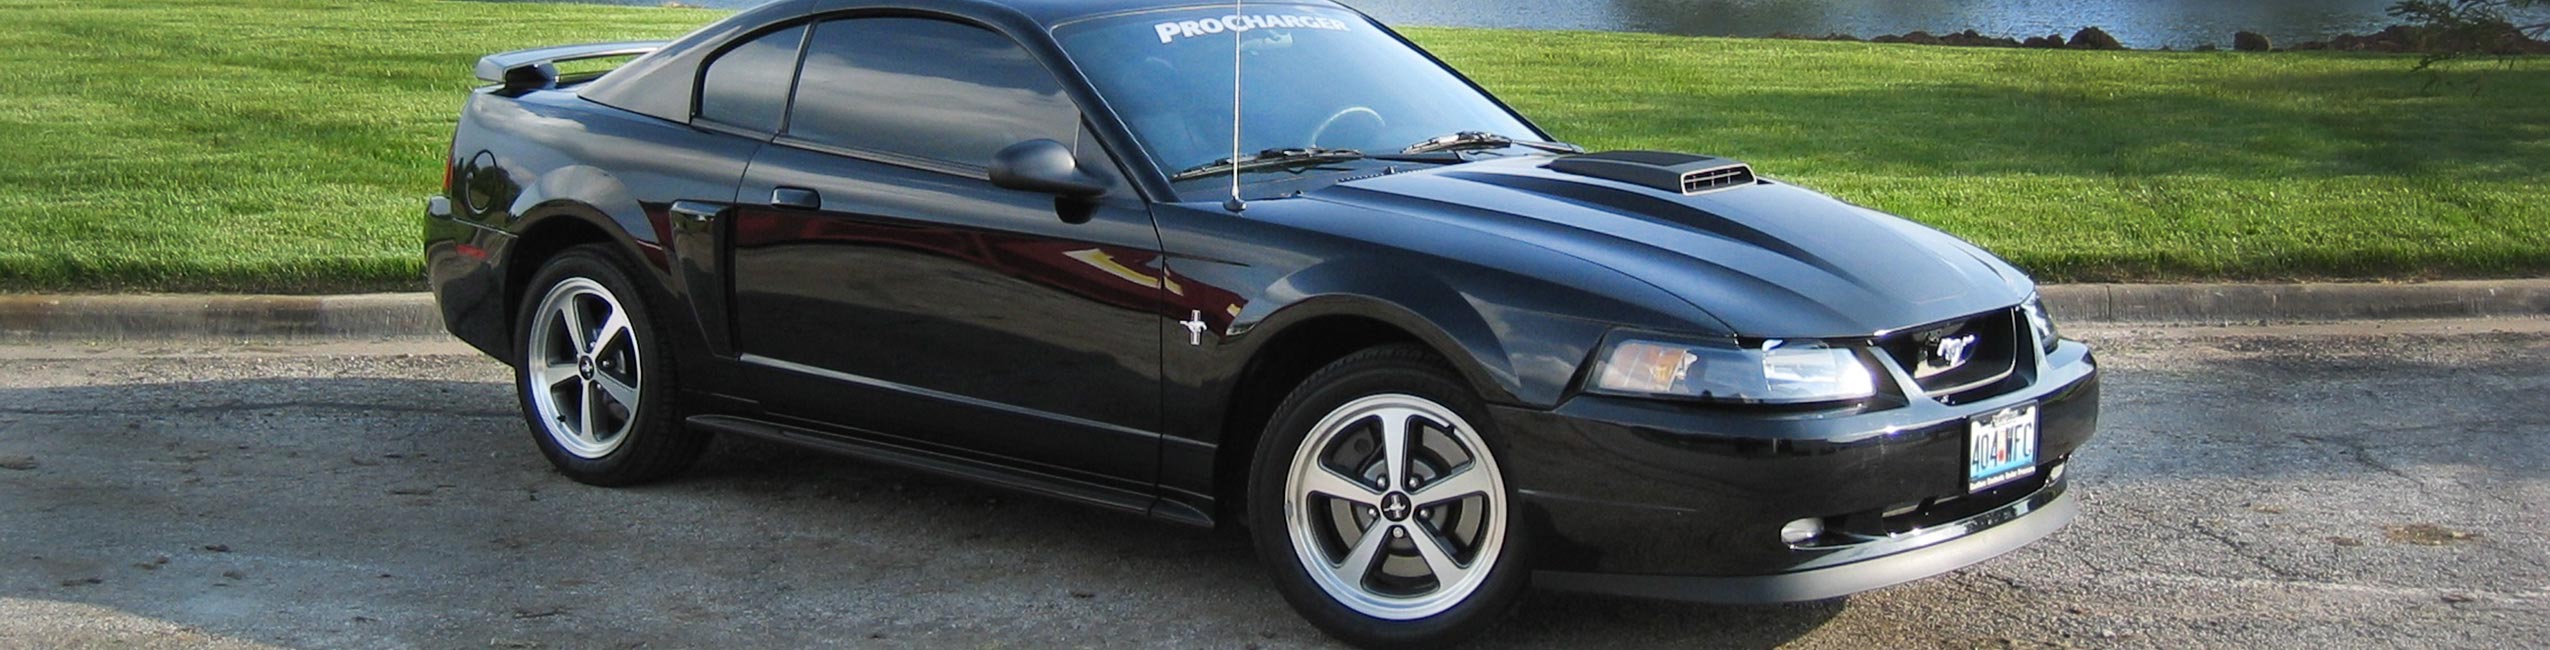 2003 Ford Mustang Mach 1 with supercharger